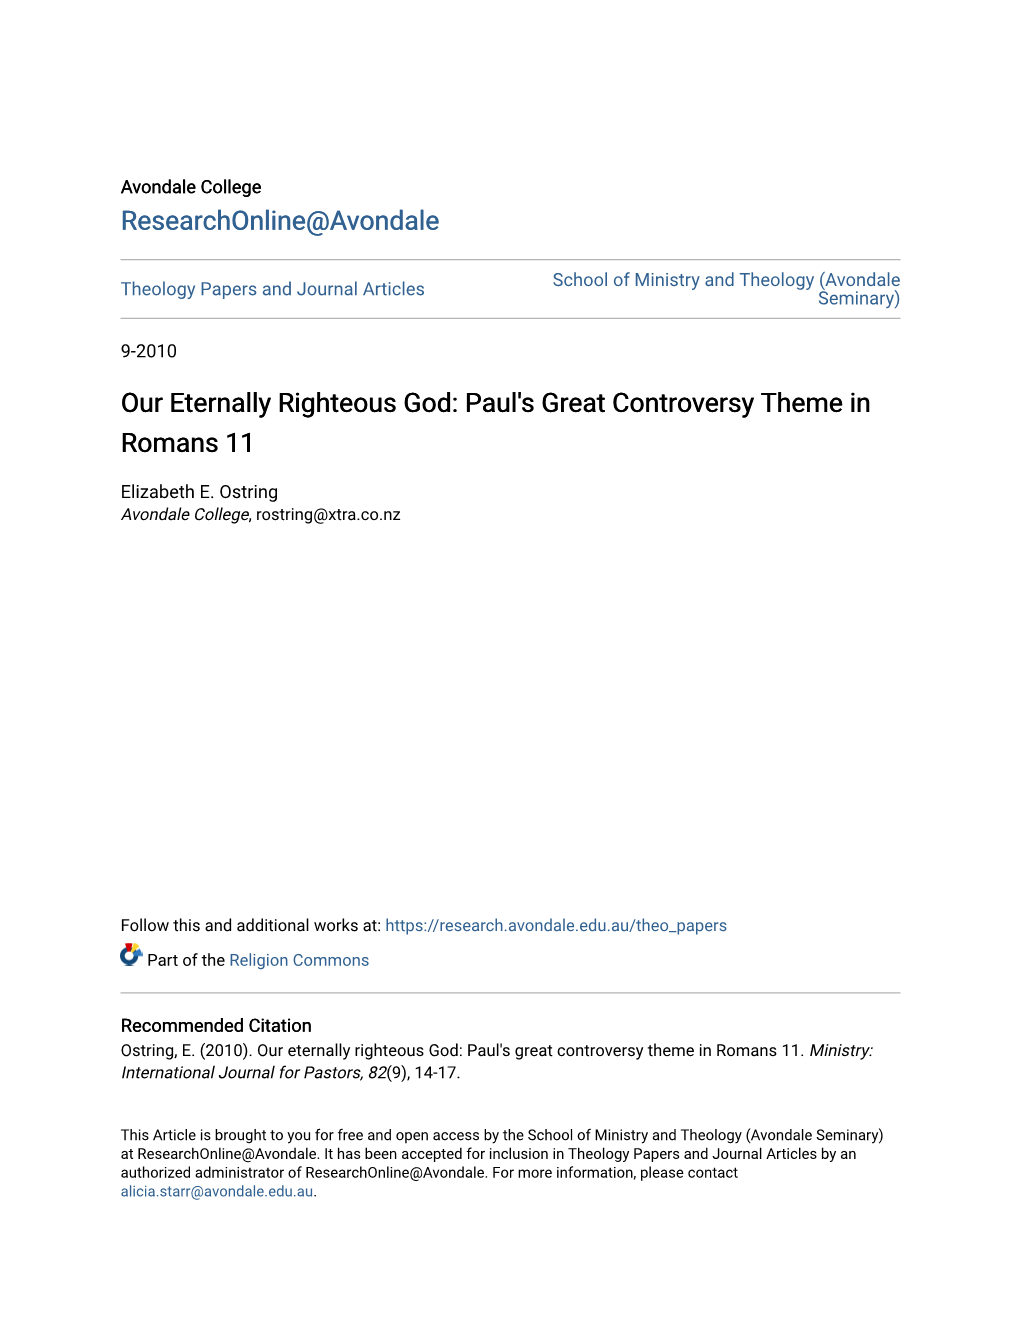 Our Eternally Righteous God: Paul's Great Controversy Theme in Romans 11